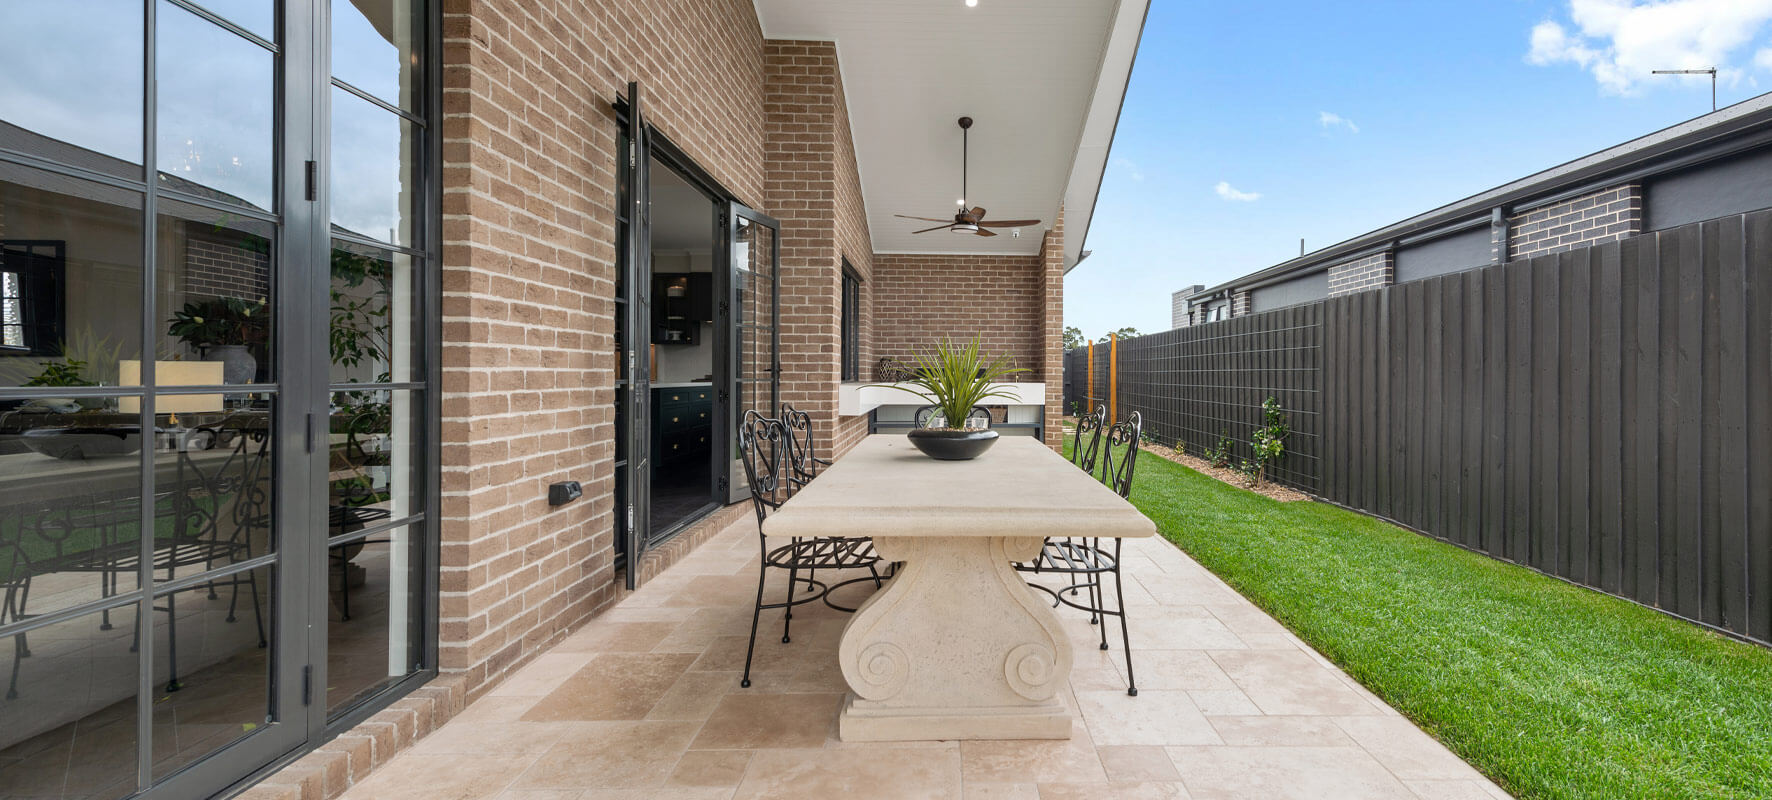 Photo of outdoor living area in Ranch style home showing stone table with black wrought iron chairs.